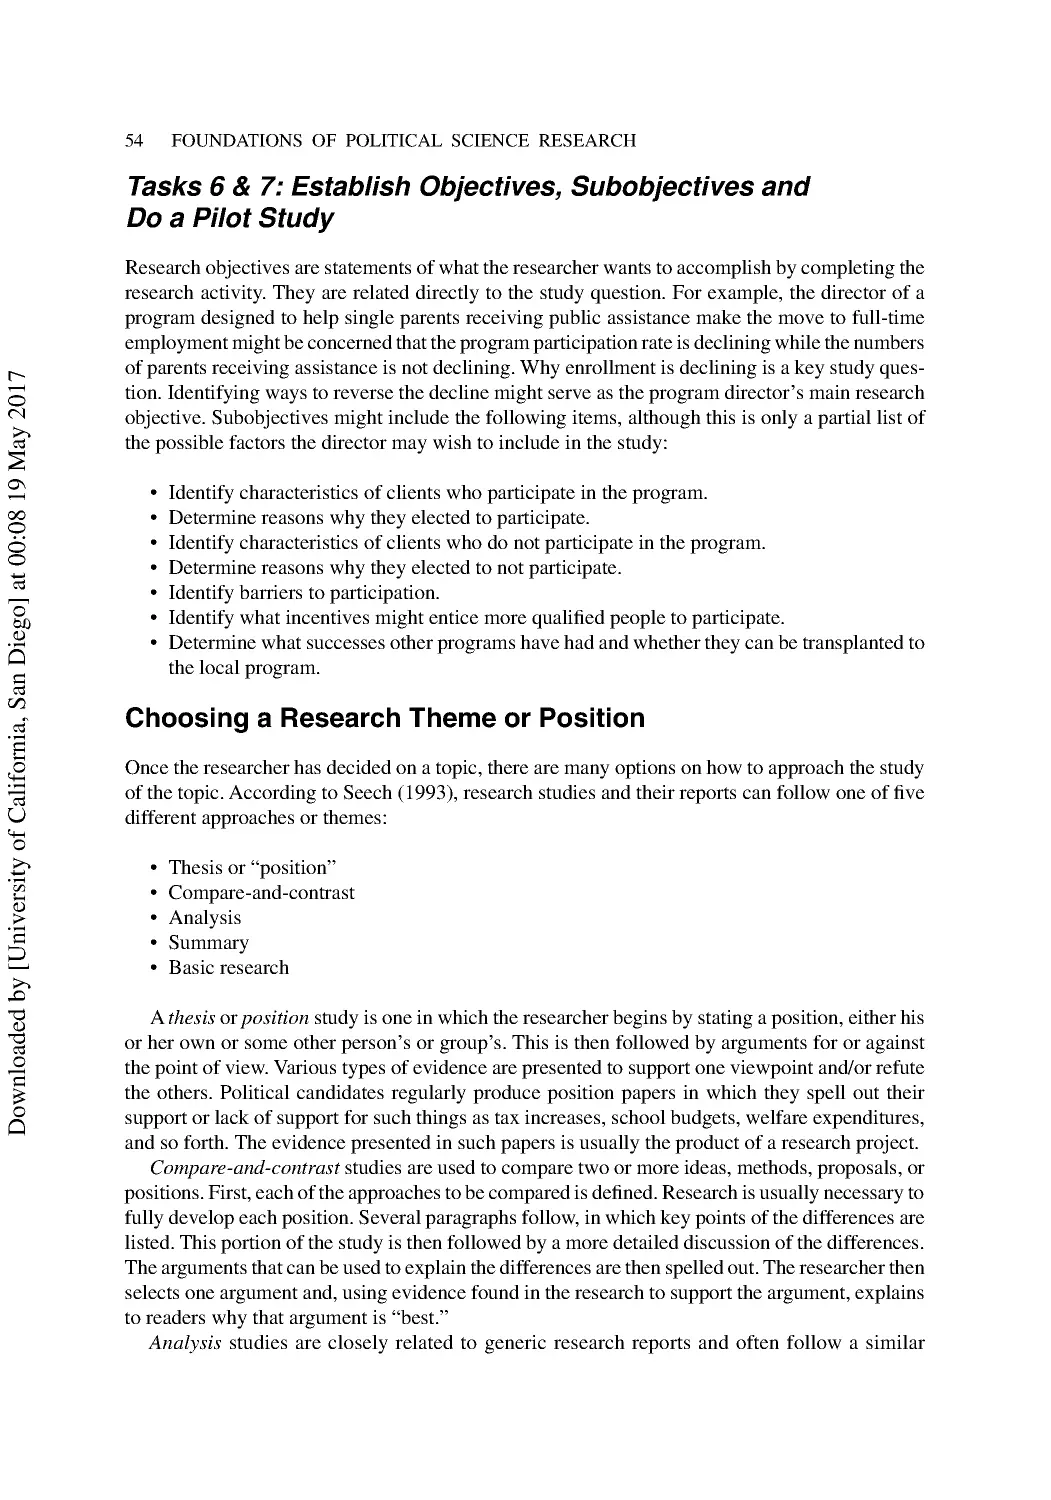 Choosing a Research Theme or Position